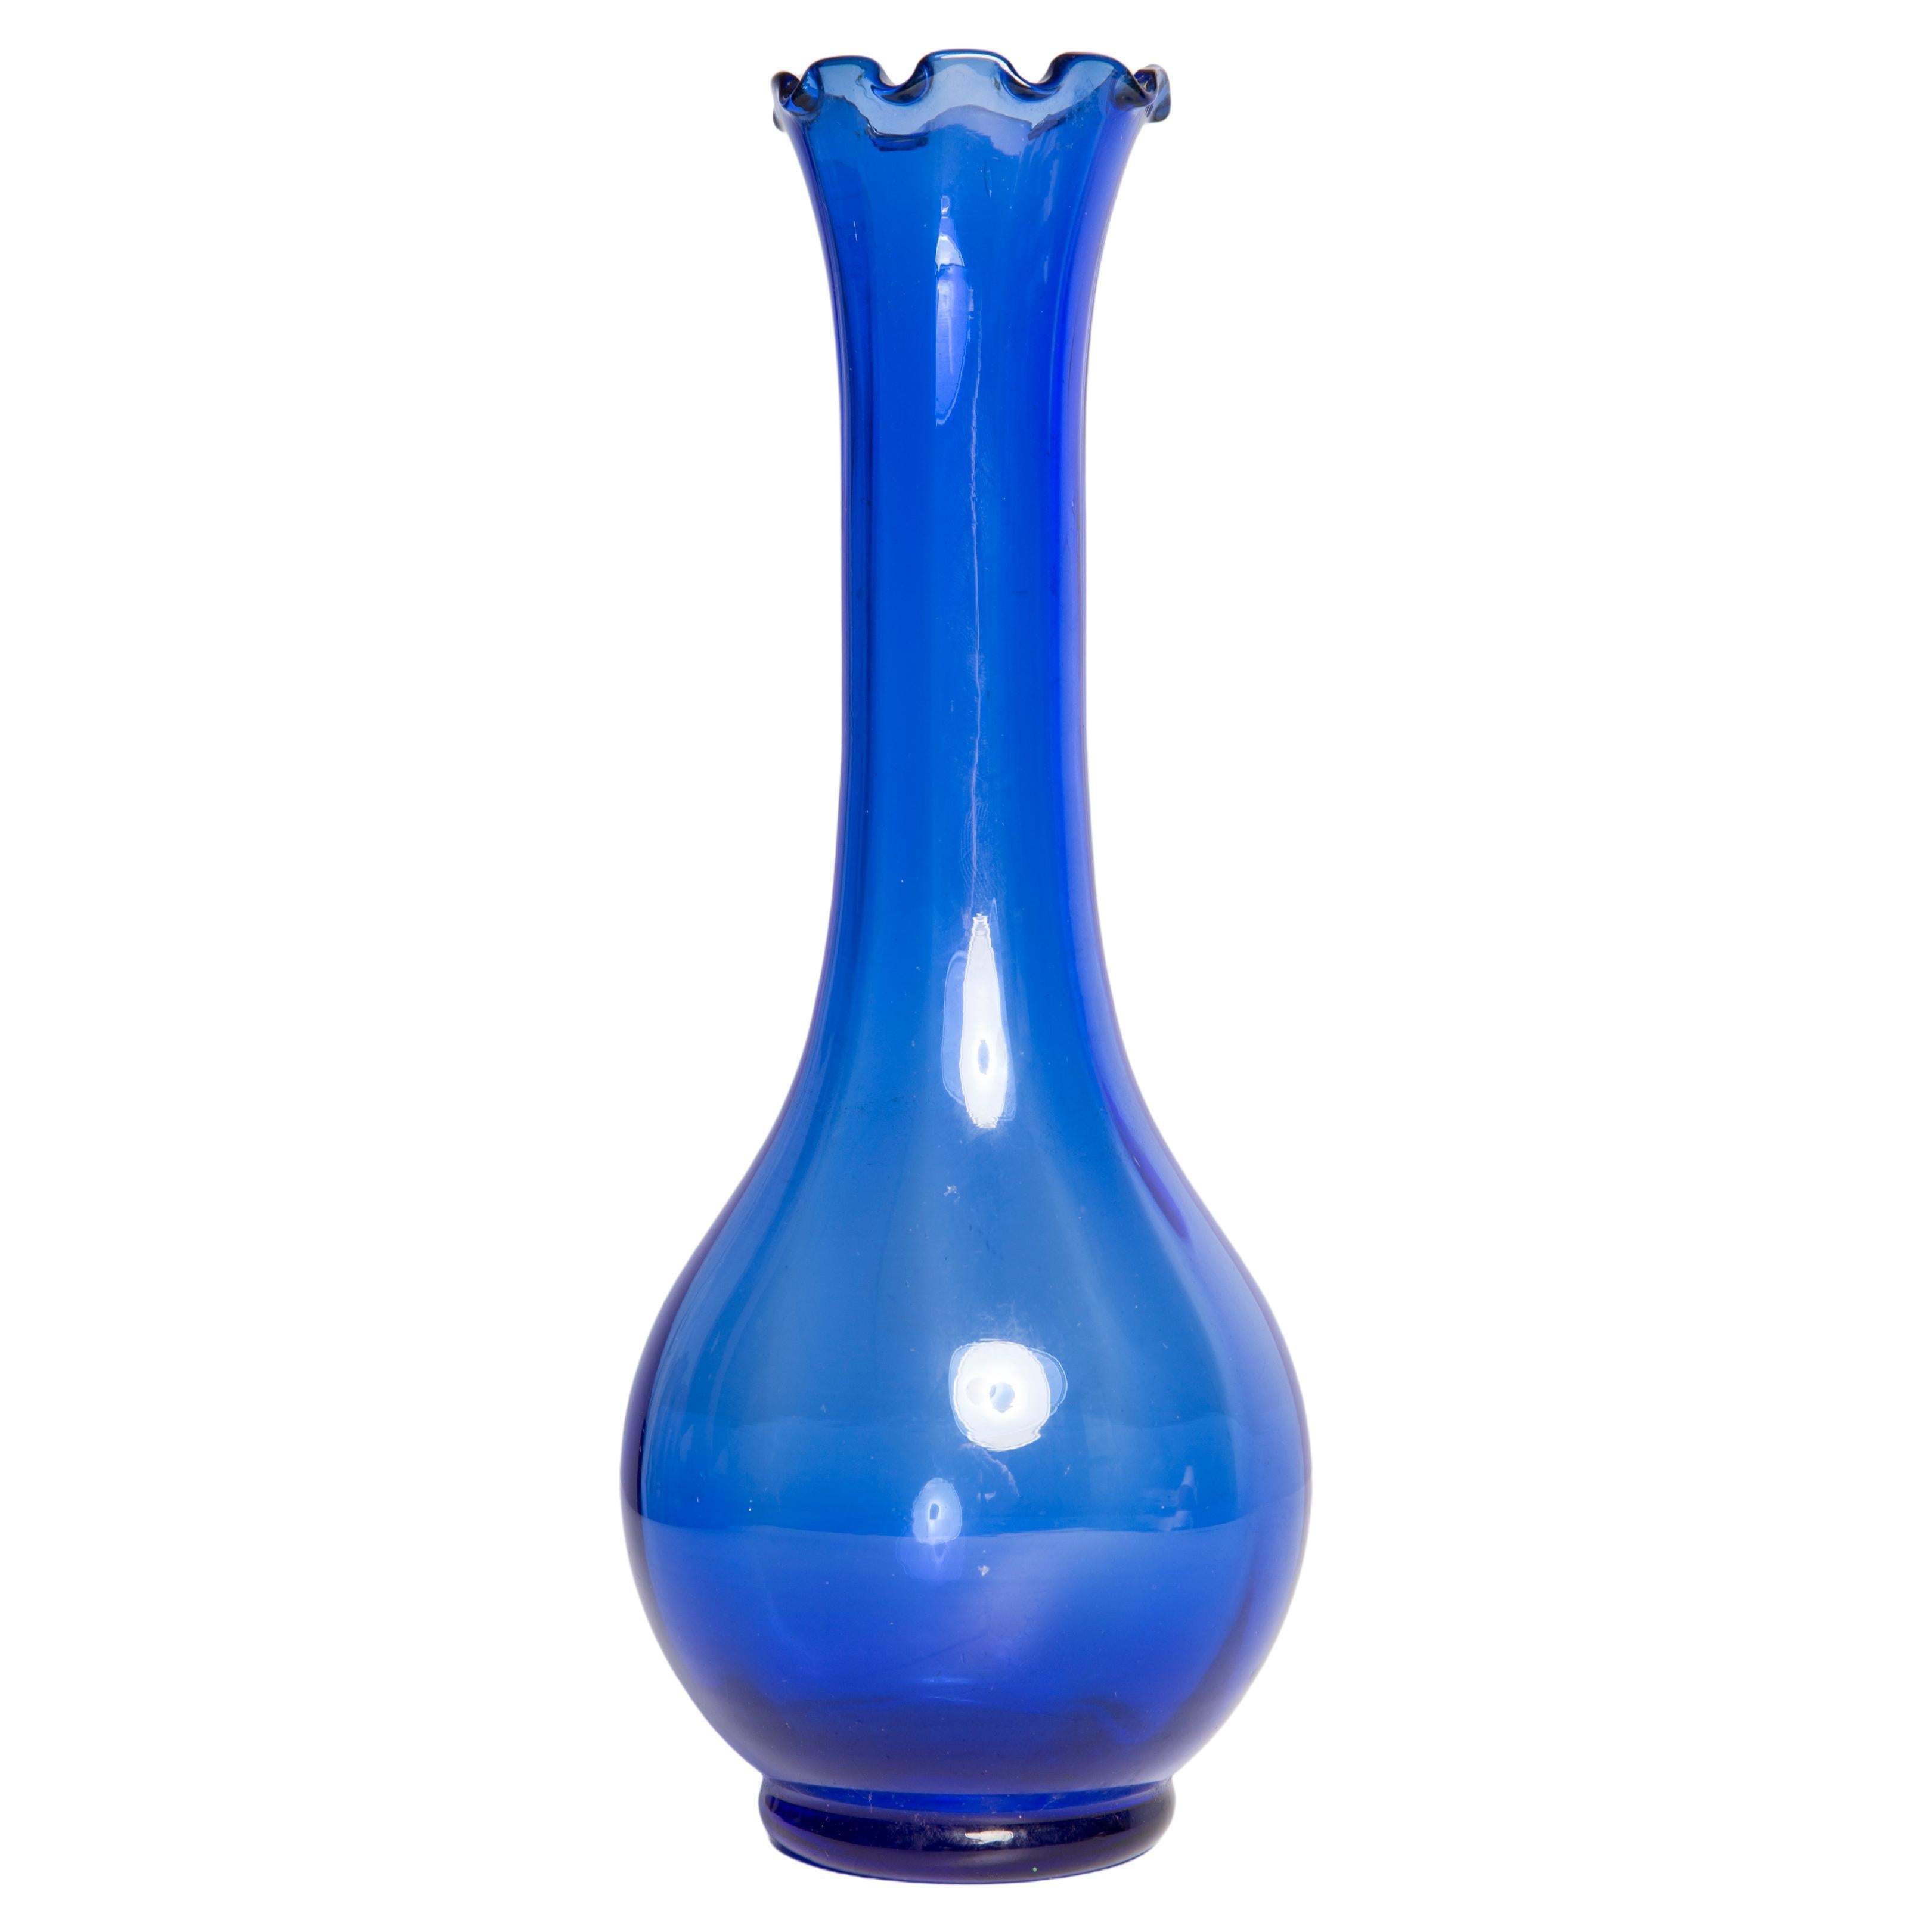 Midcentury Glass Blue Vase with a Frill, Europe, 1960s